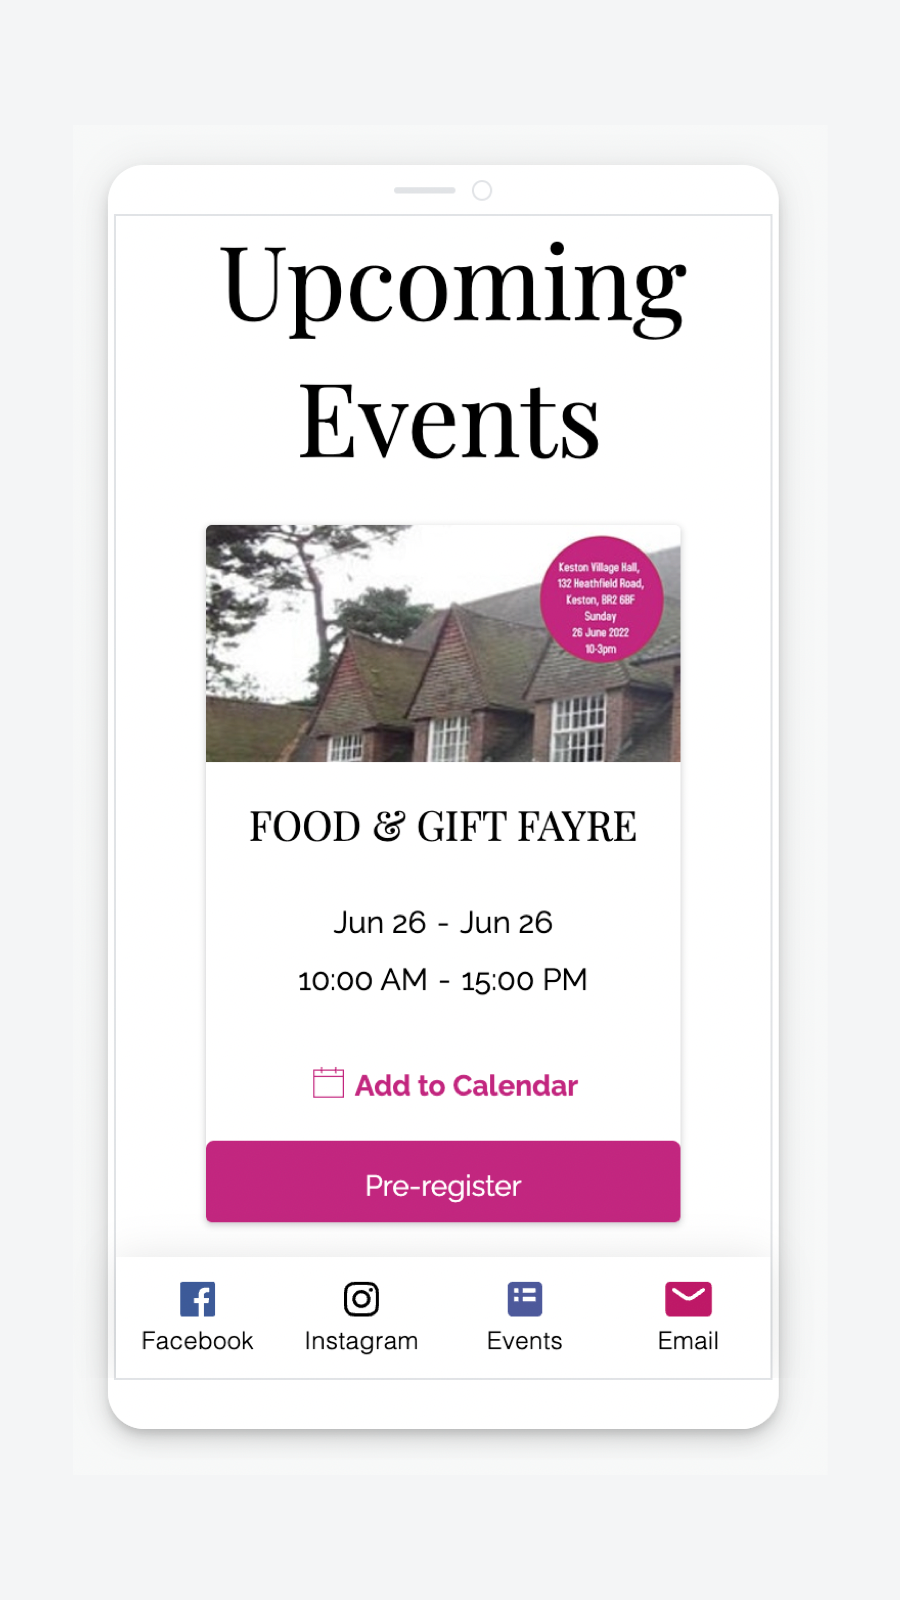 Fully responsive event list to make your events look great from any device